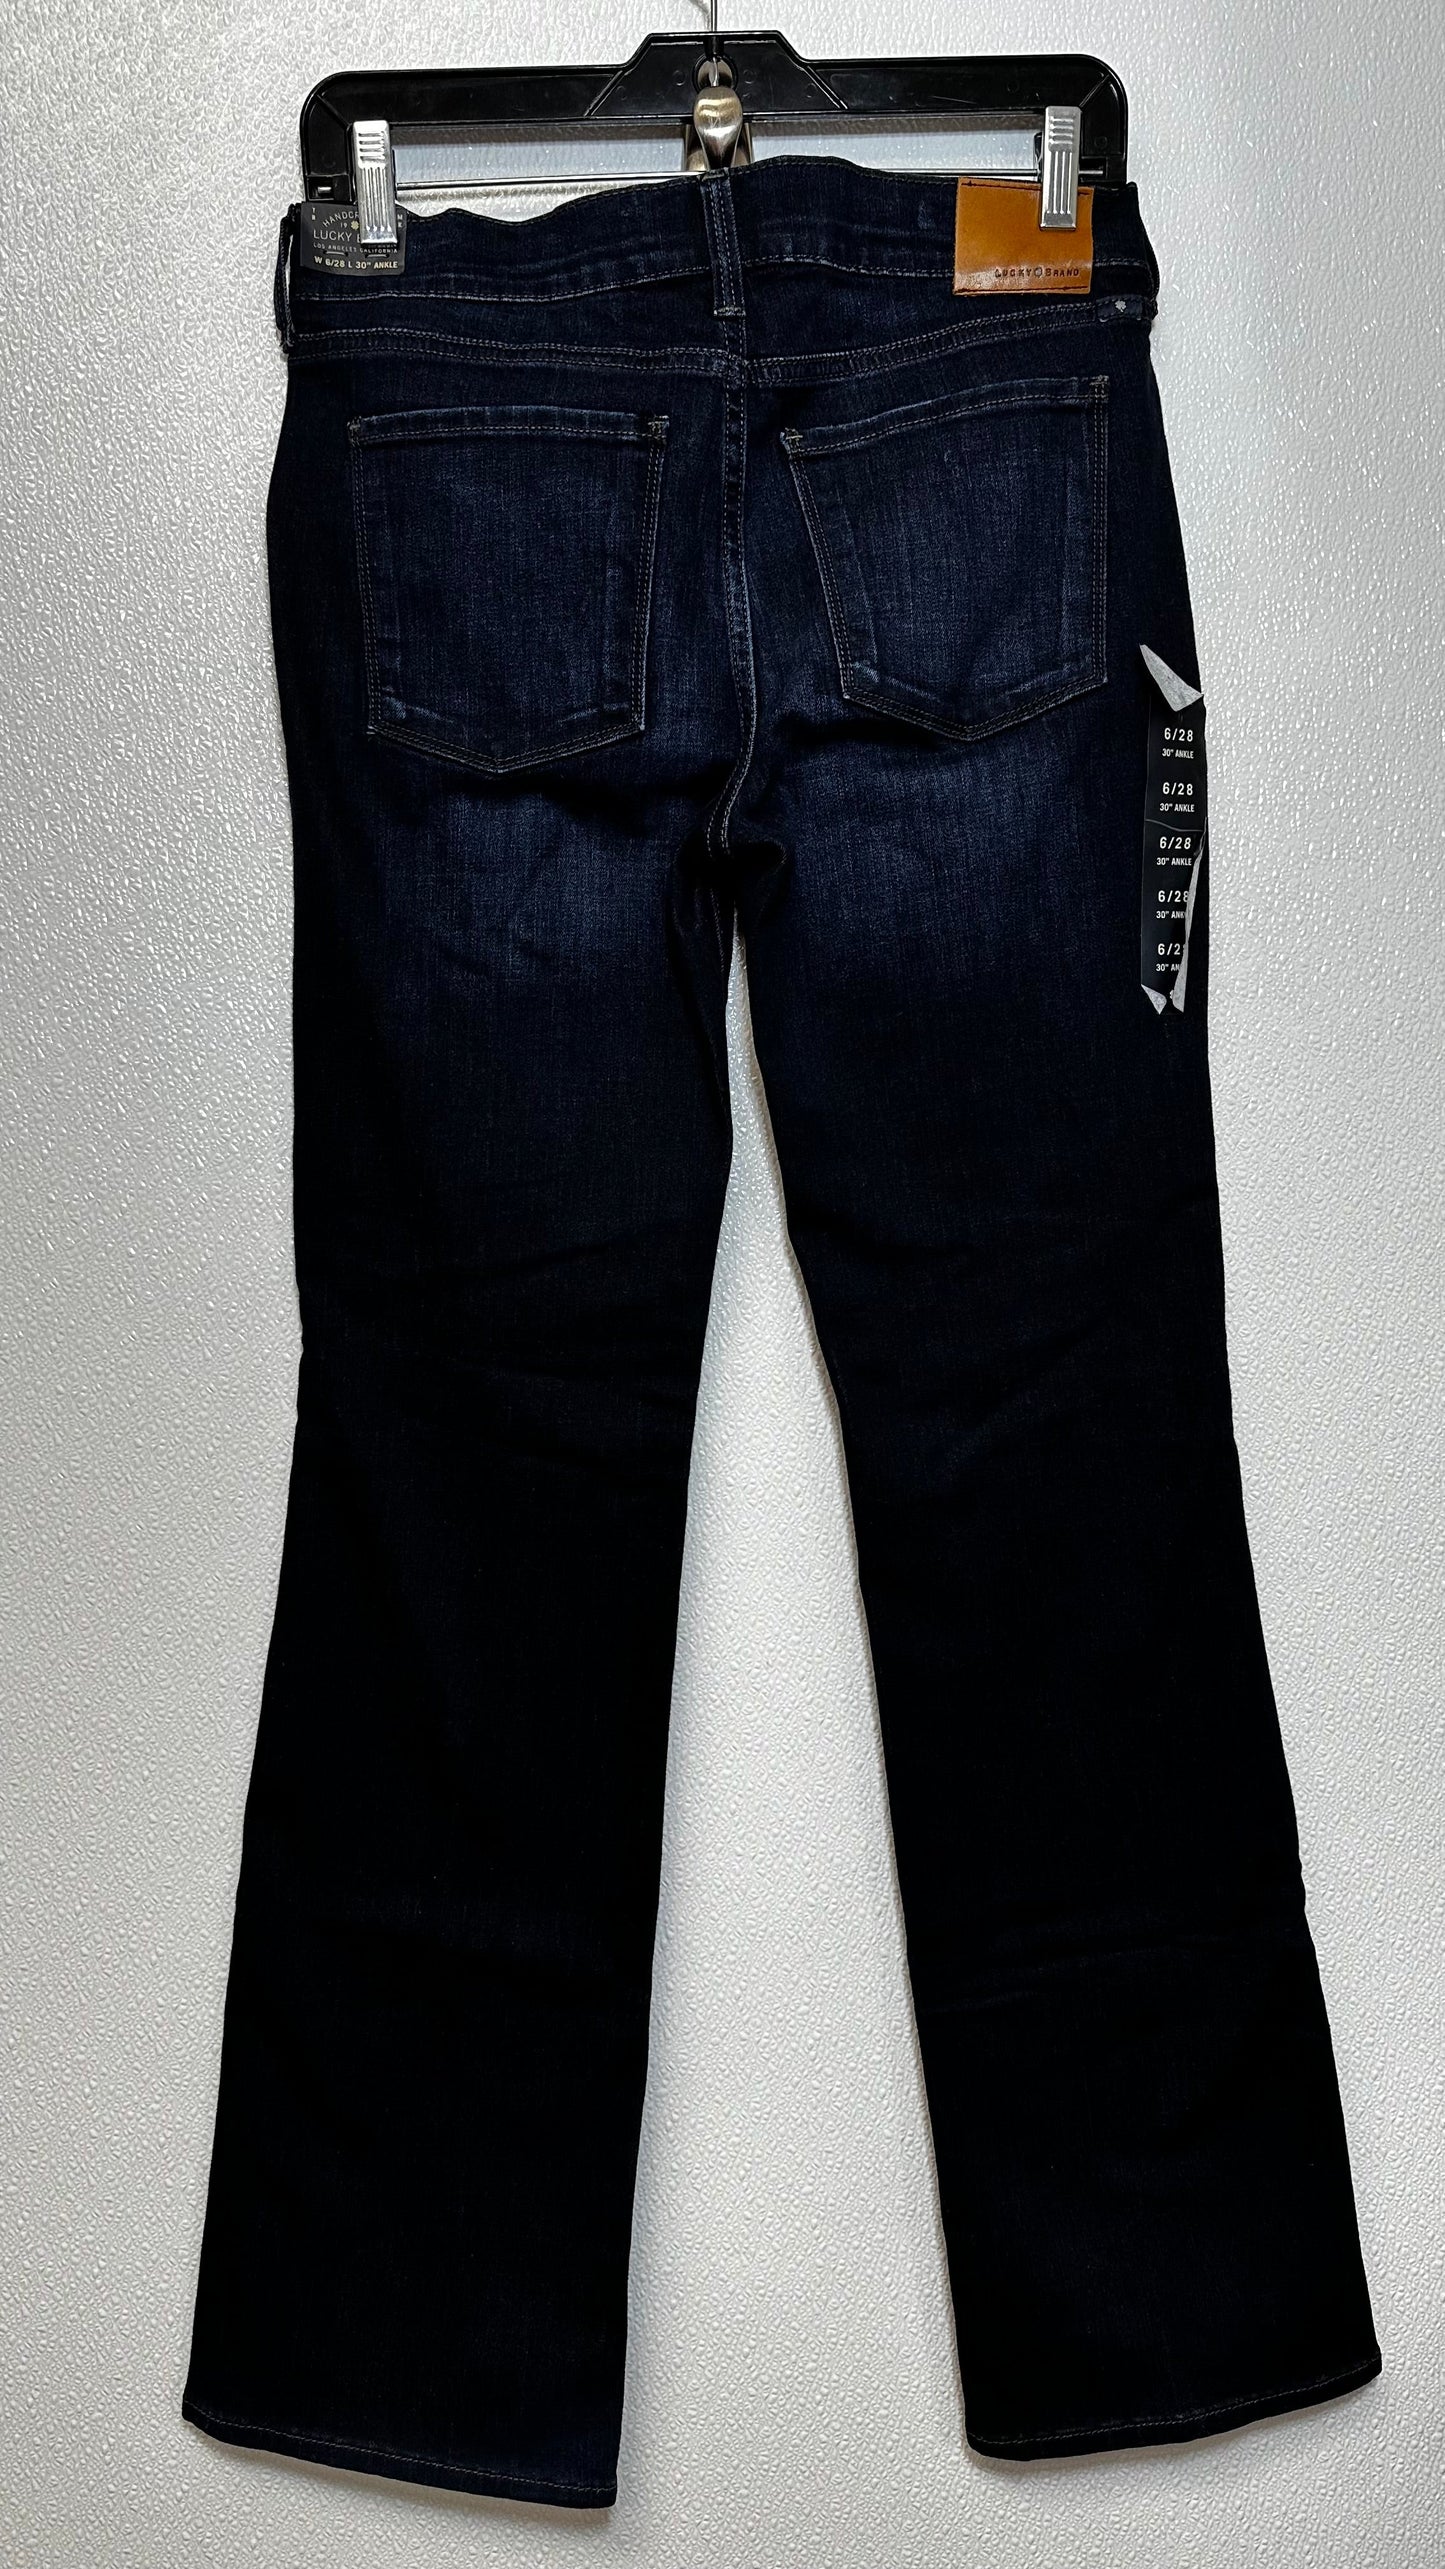 Denim Jeans Flared Lucky Brand, Size 6